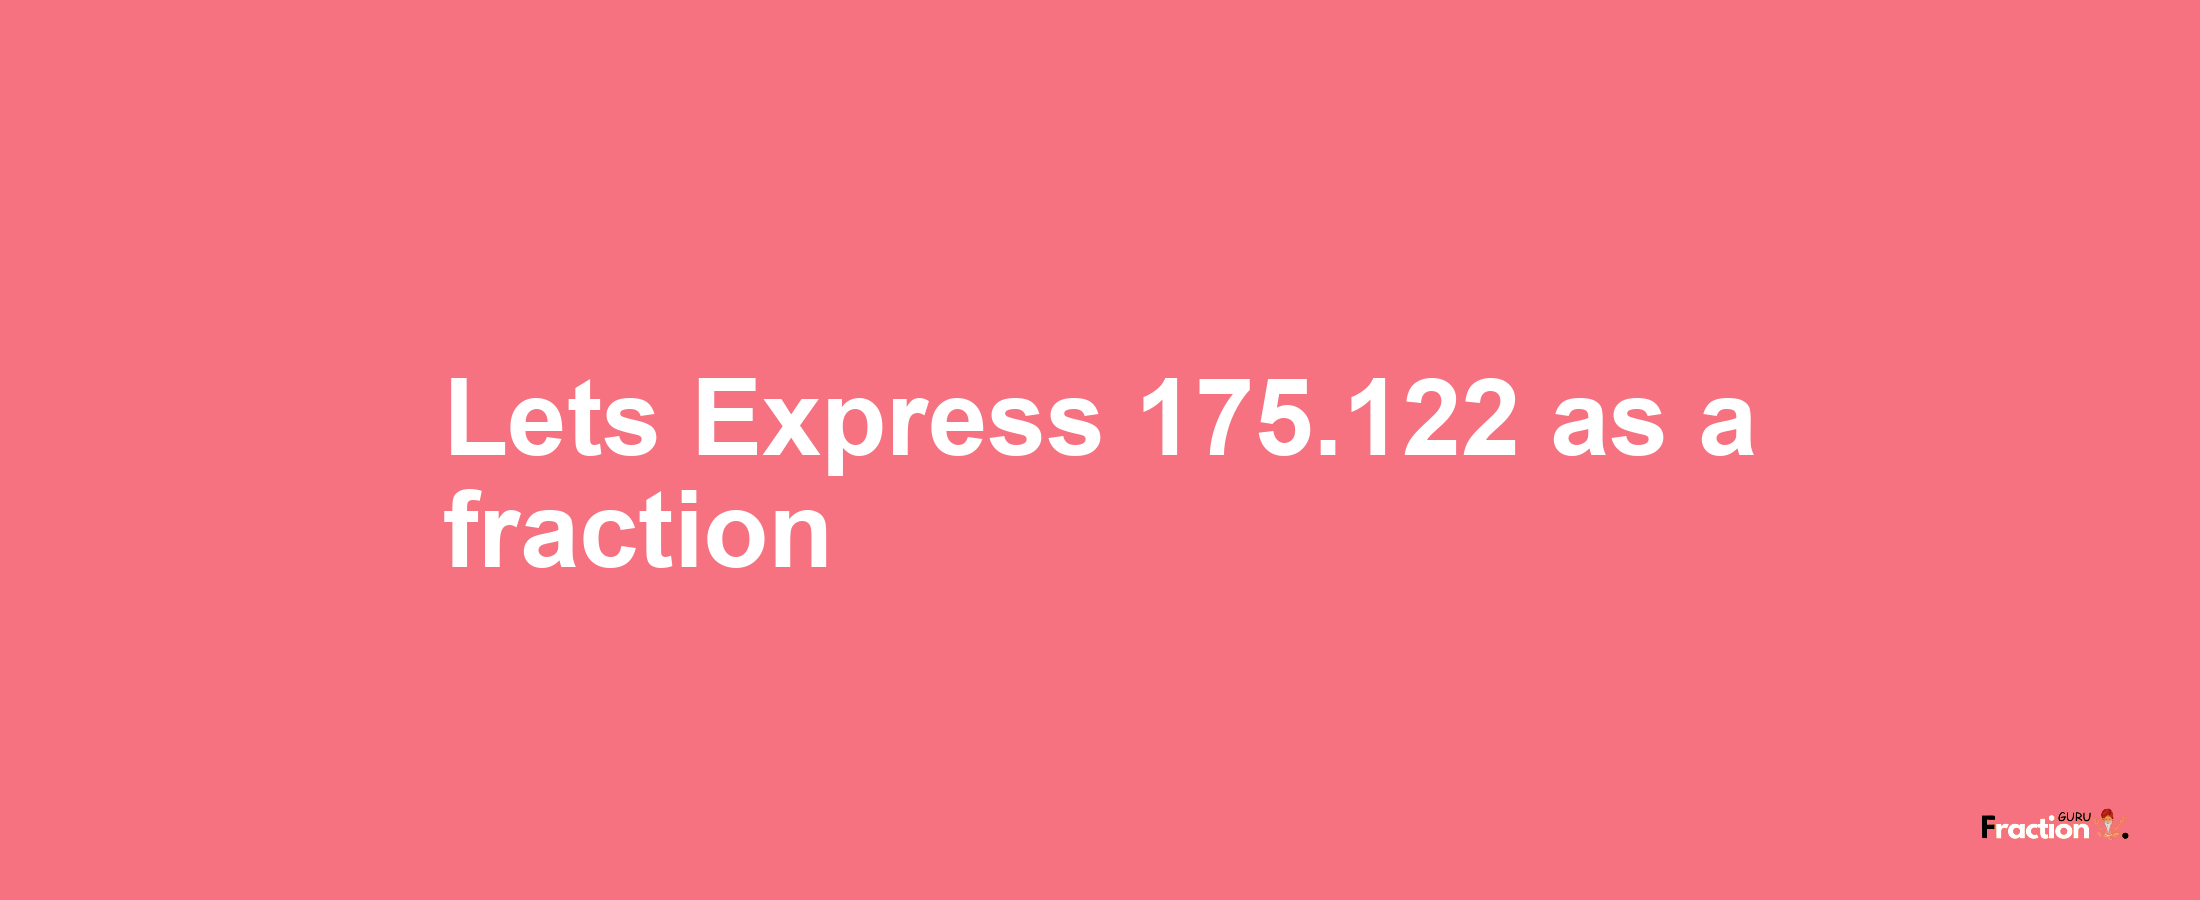 Lets Express 175.122 as afraction